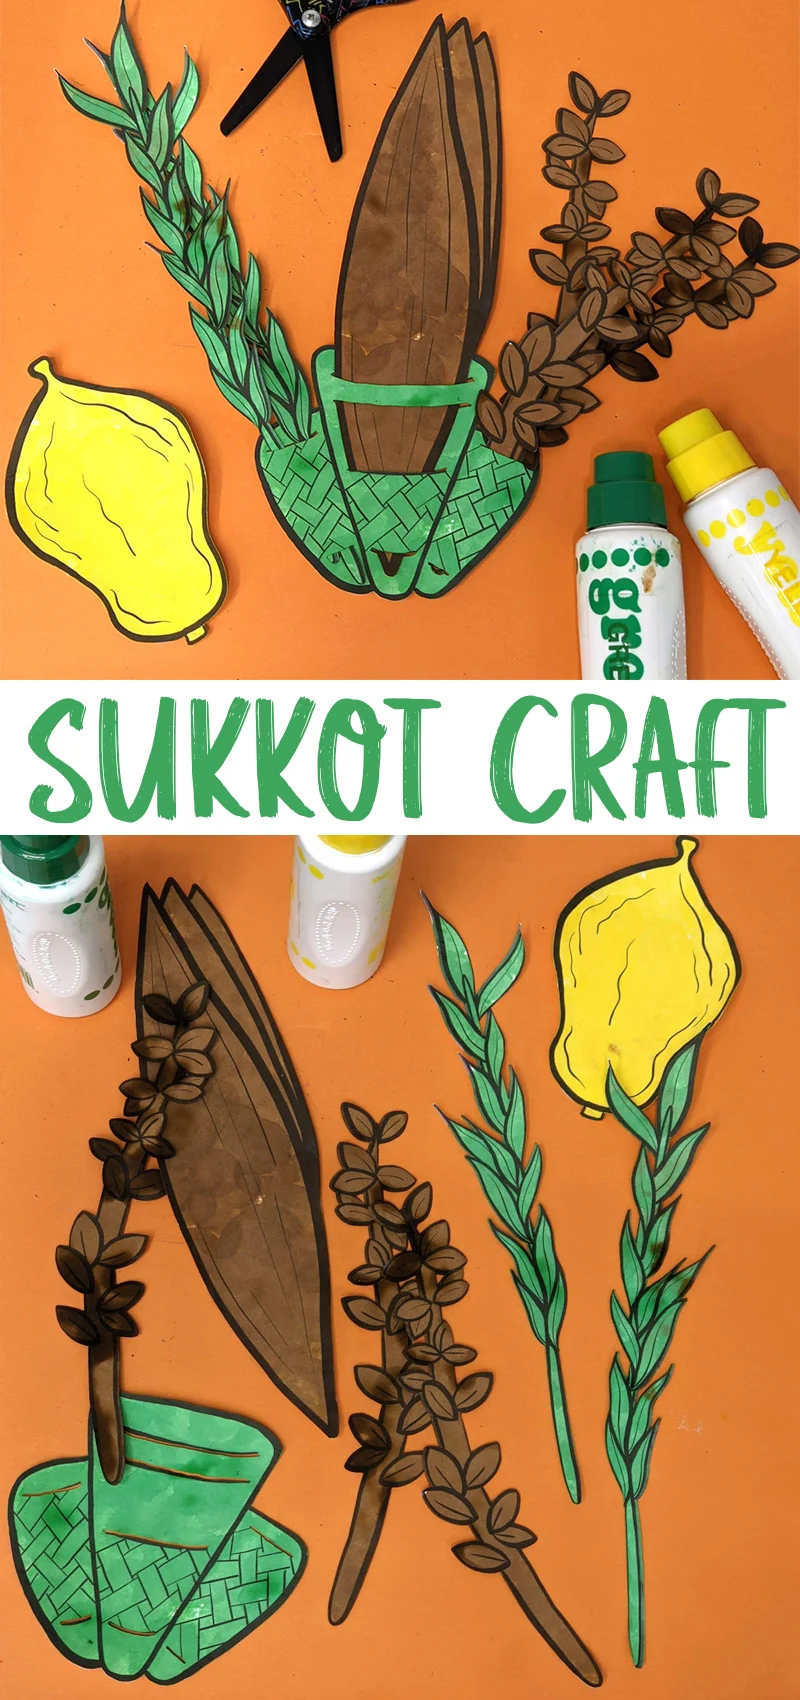 Looking for a fun and simple Lulav and Etrog craft for kids for Sukkot? This printable teaches kids the arrangement and the parts too!